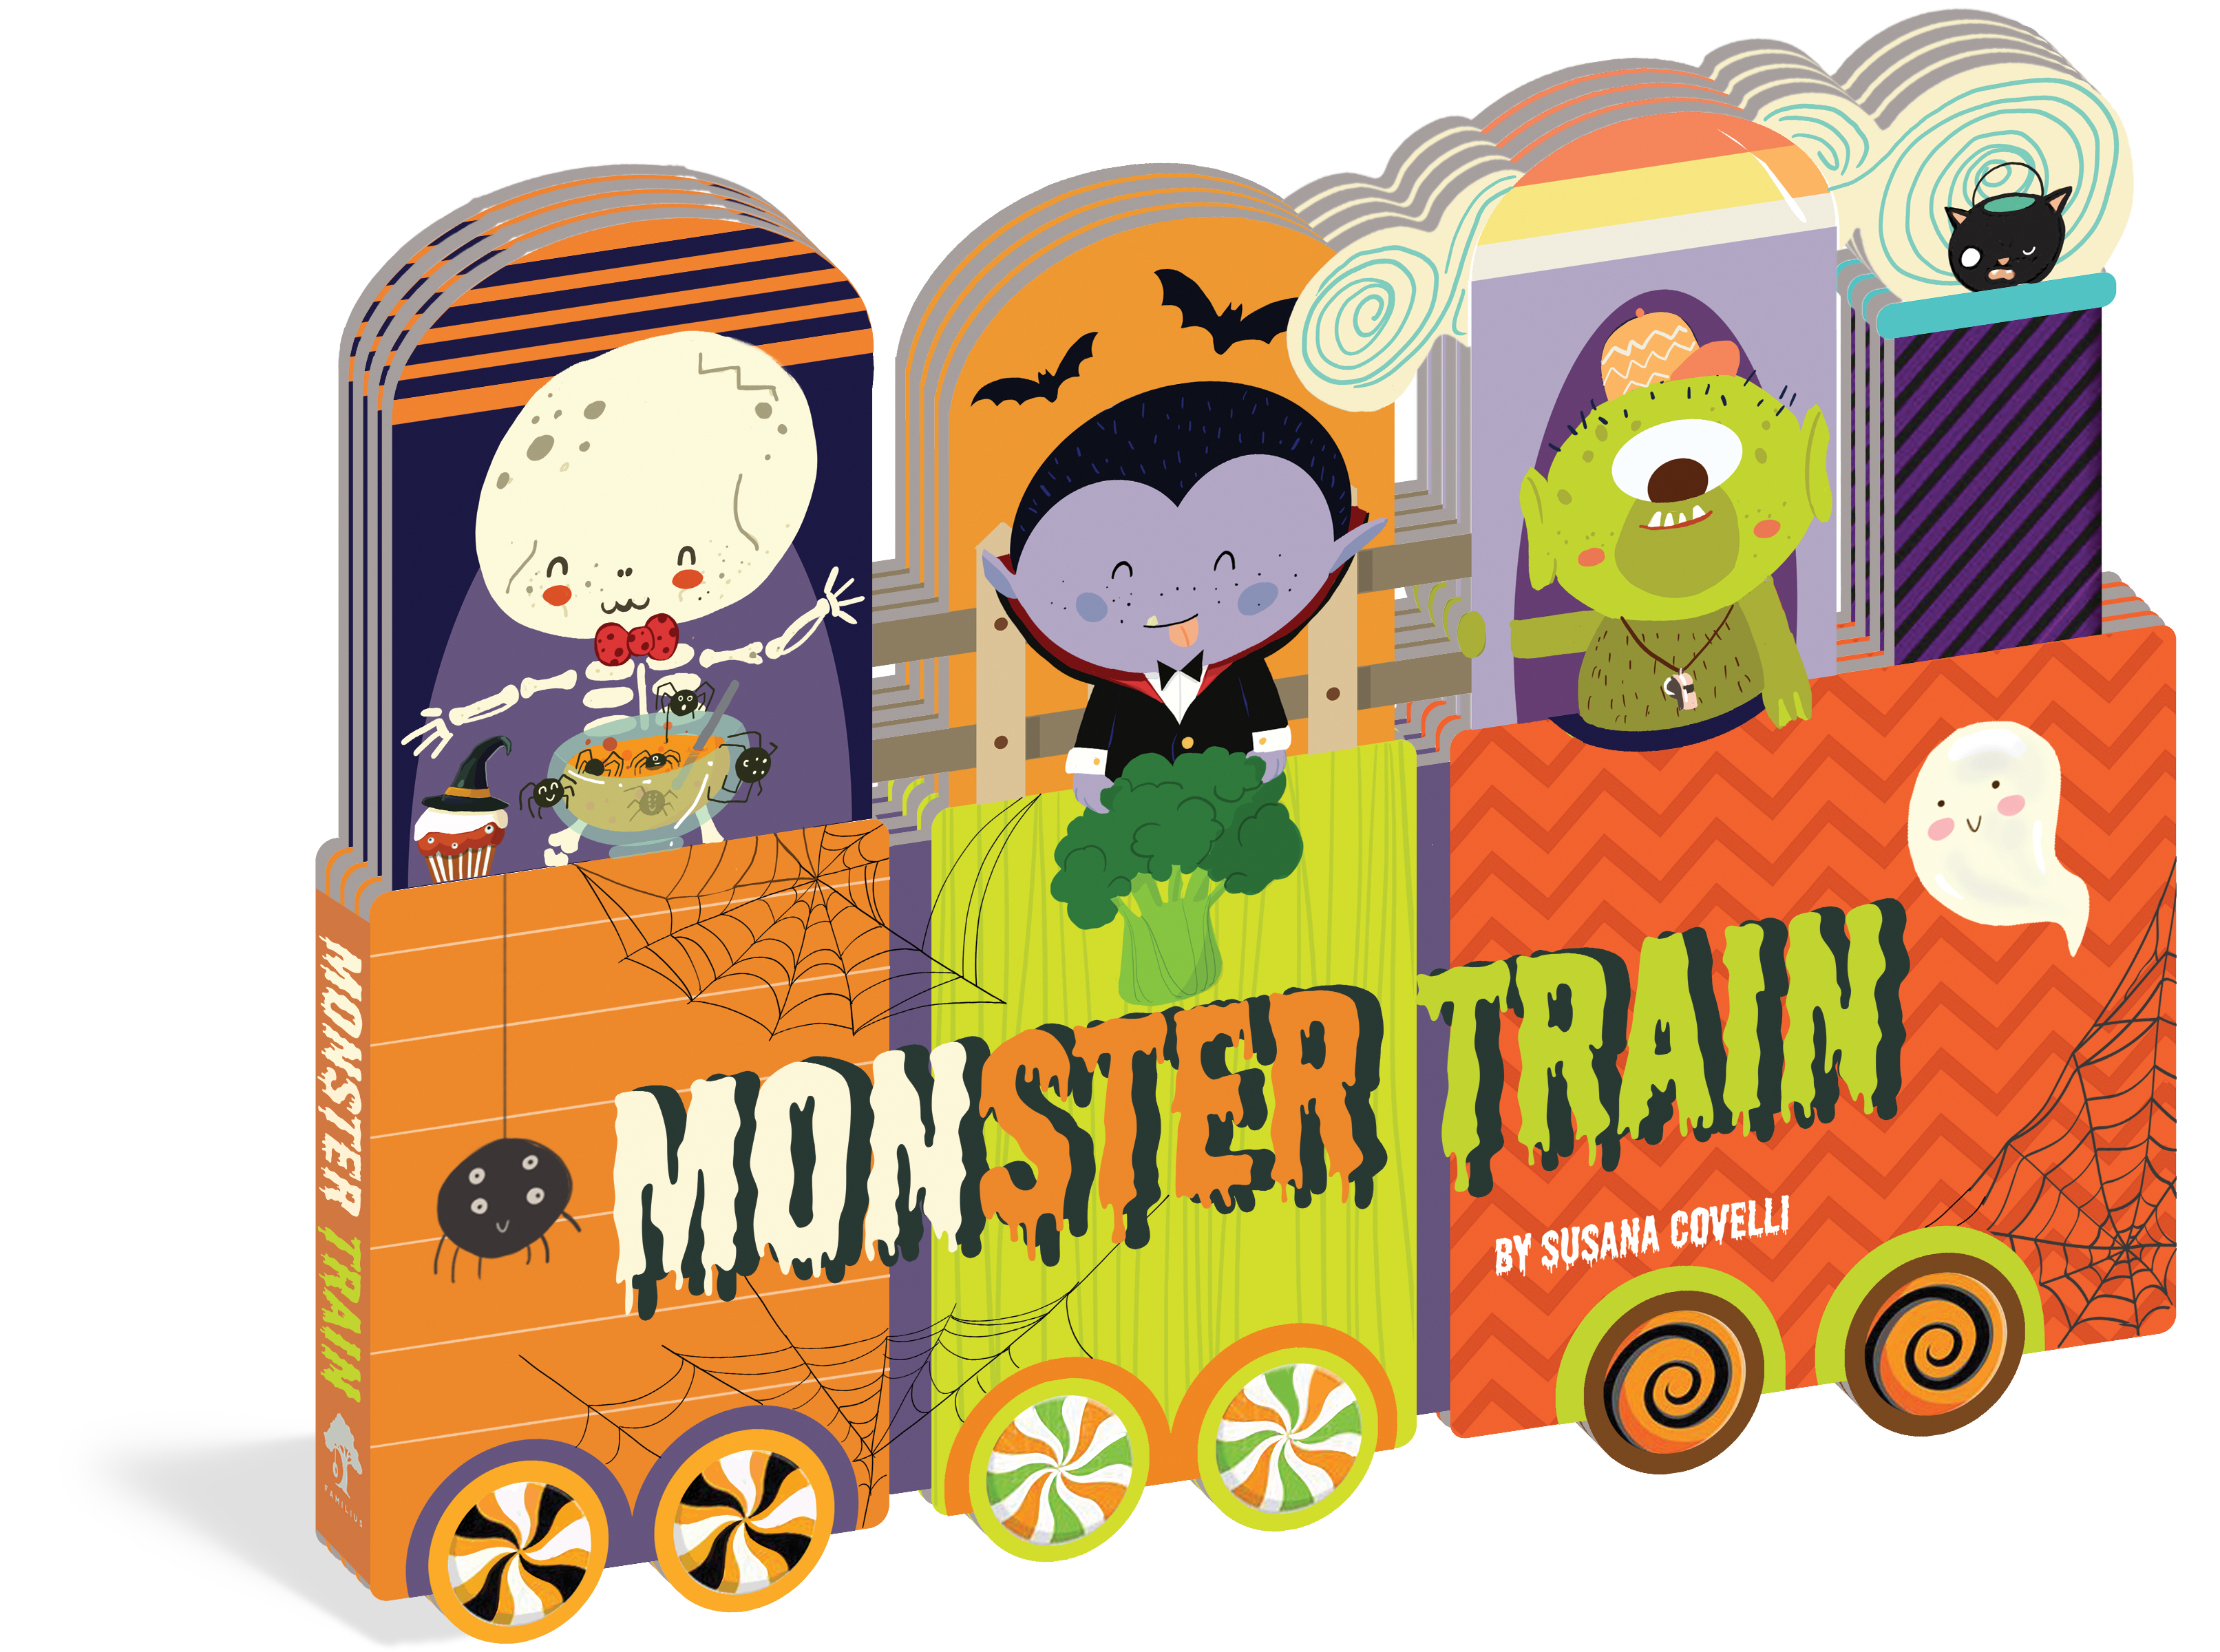 The cover of the board book Monster Train.